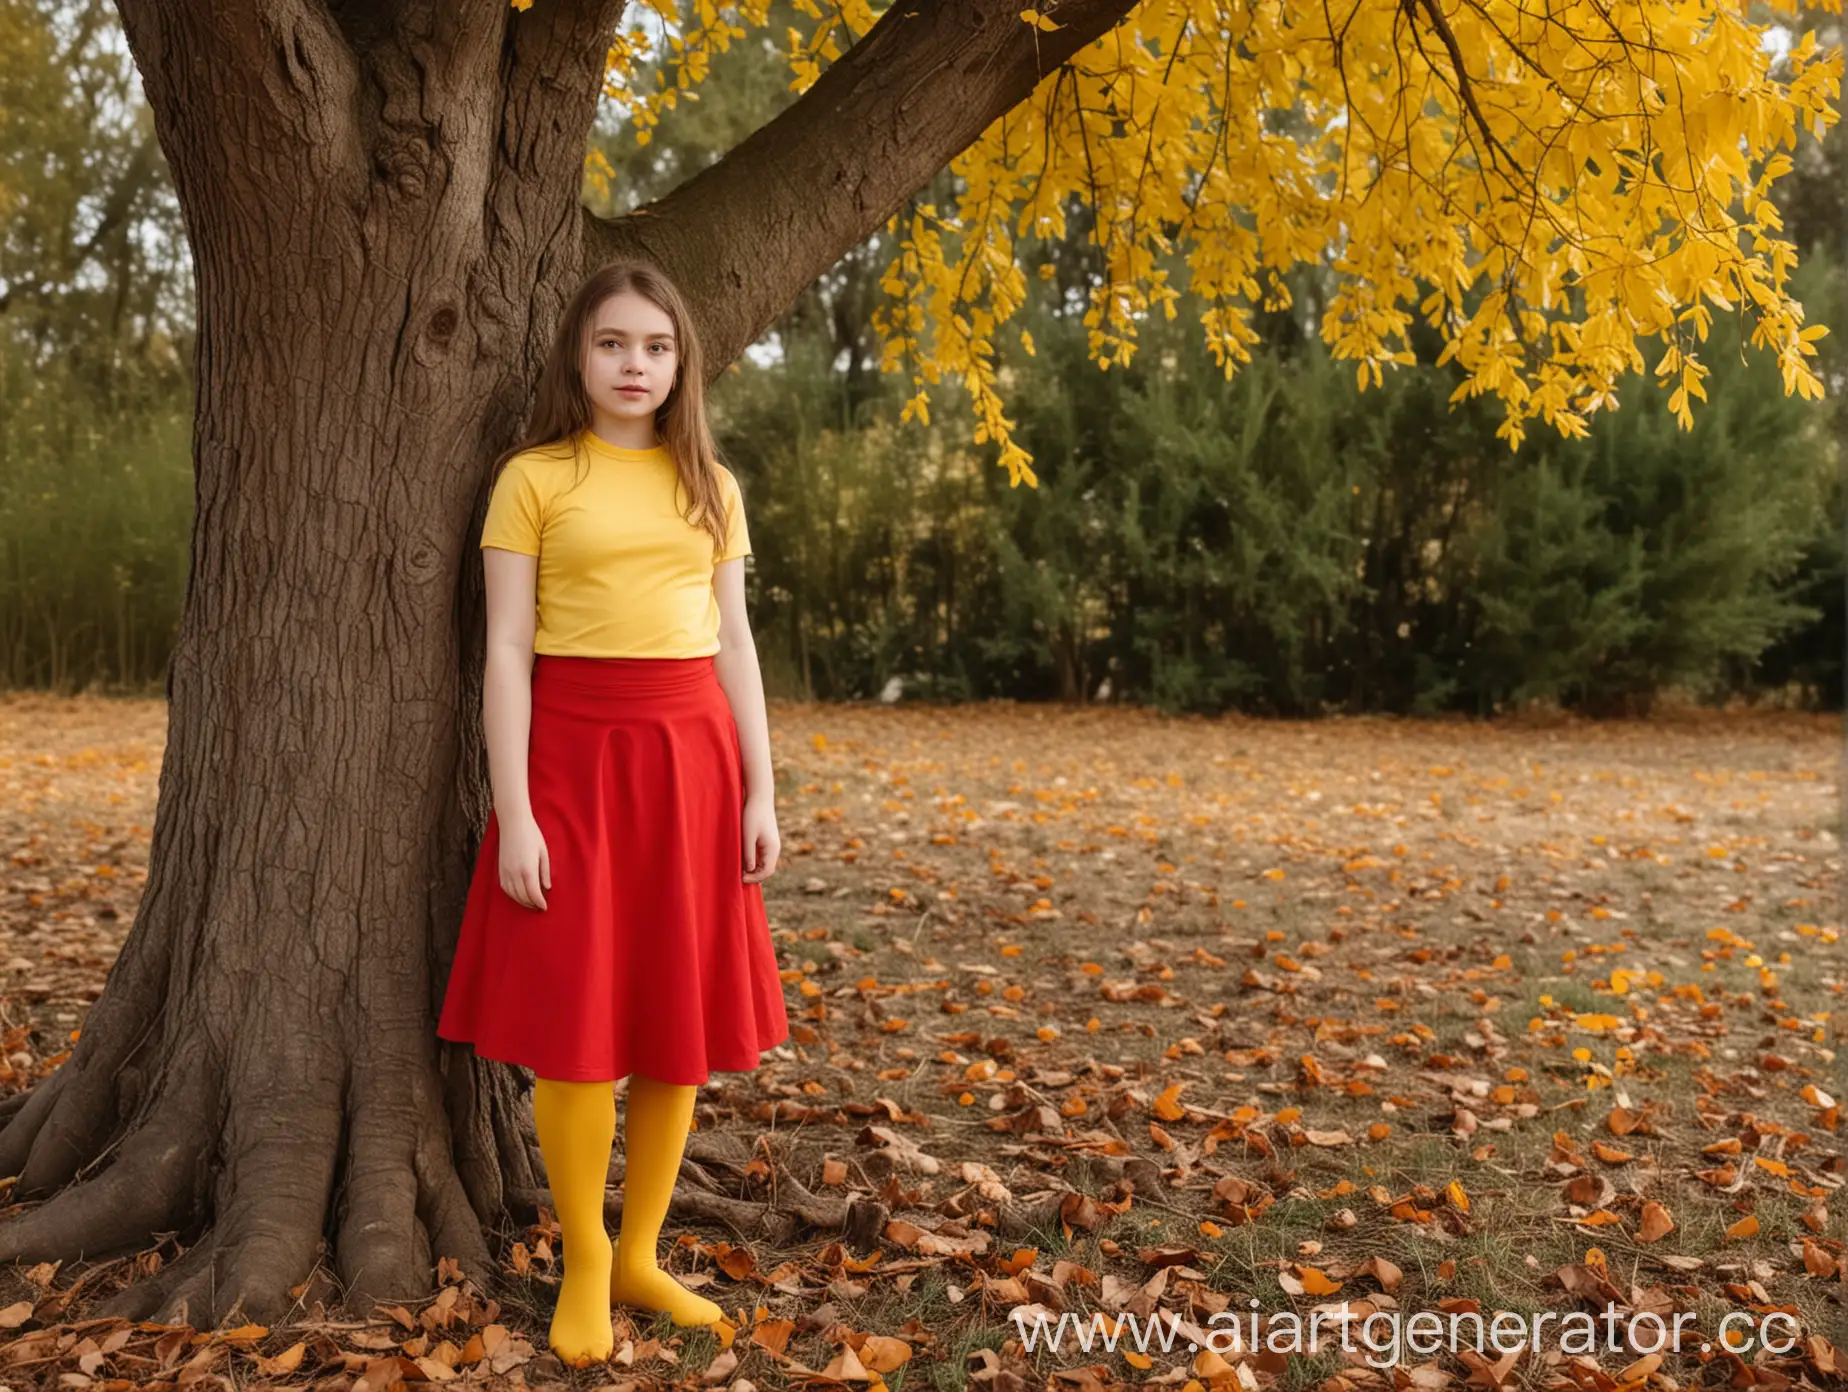 Young-Girl-in-Vibrant-Red-Skirt-and-Yellow-TShirt-Standing-by-Tree